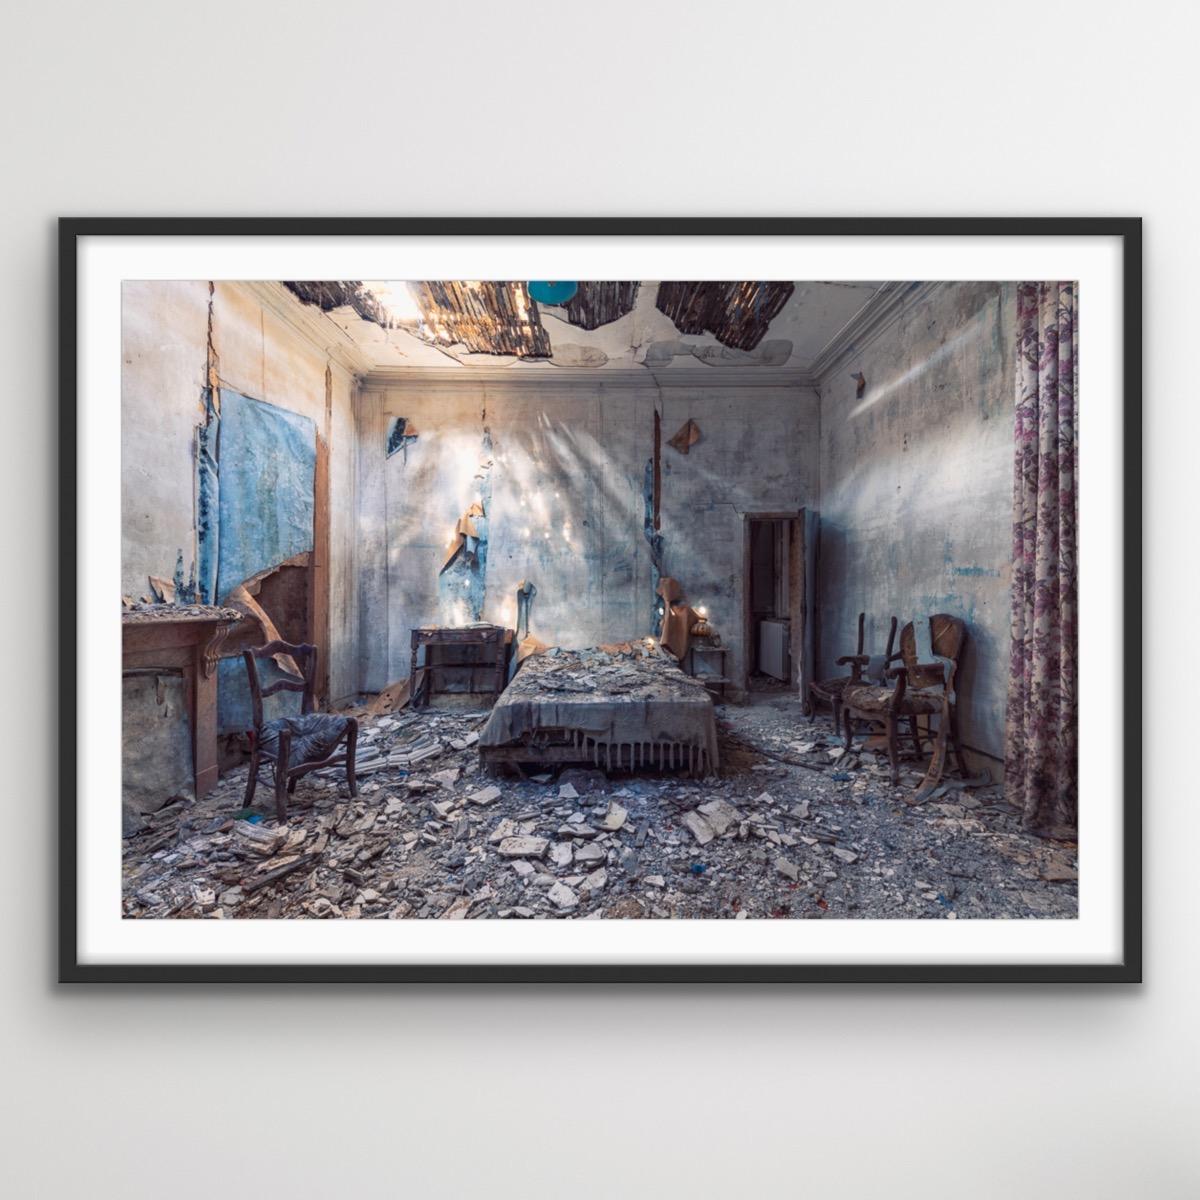 Submerge, Interior Photography, Derelict Building Artwork, Light Art Photography - Gray Color Photograph by Gina Soden